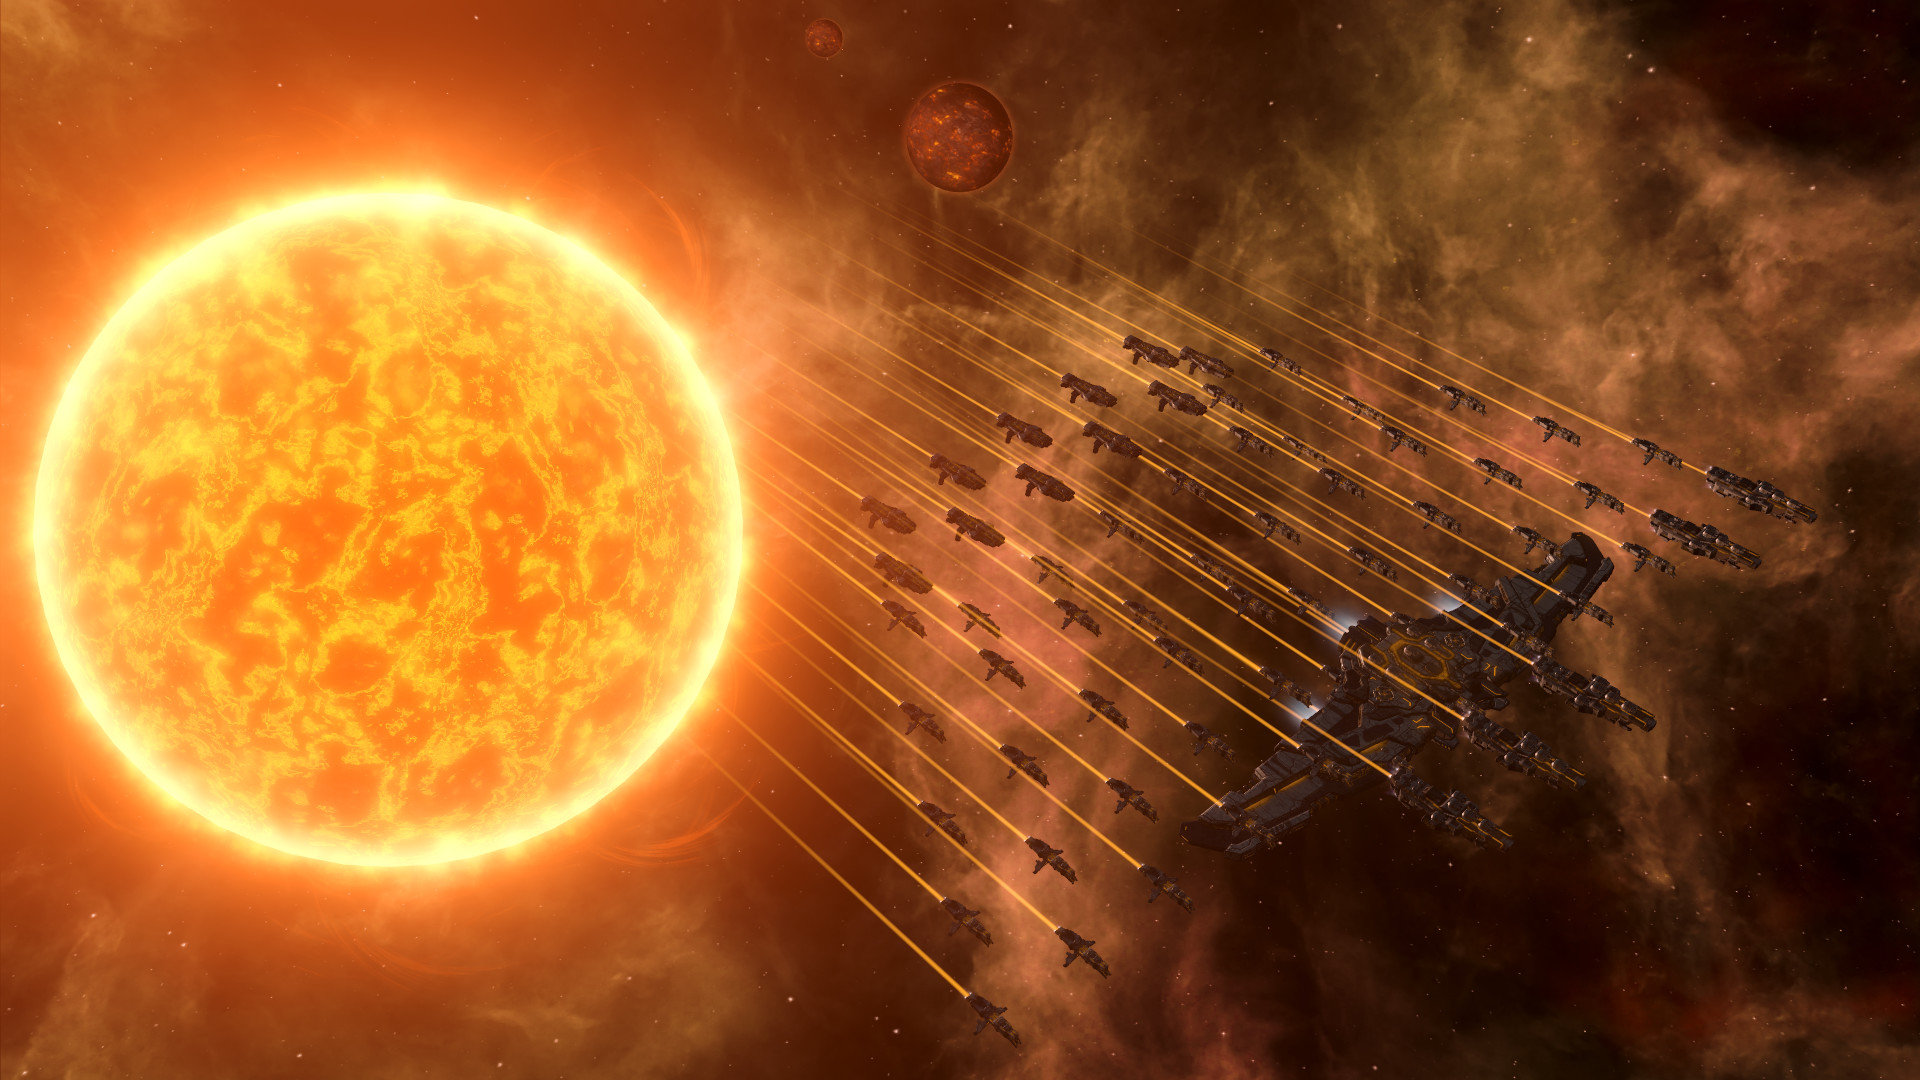 Stellaris Update 6.01 Delivers Toxoids and Fixes This September 21